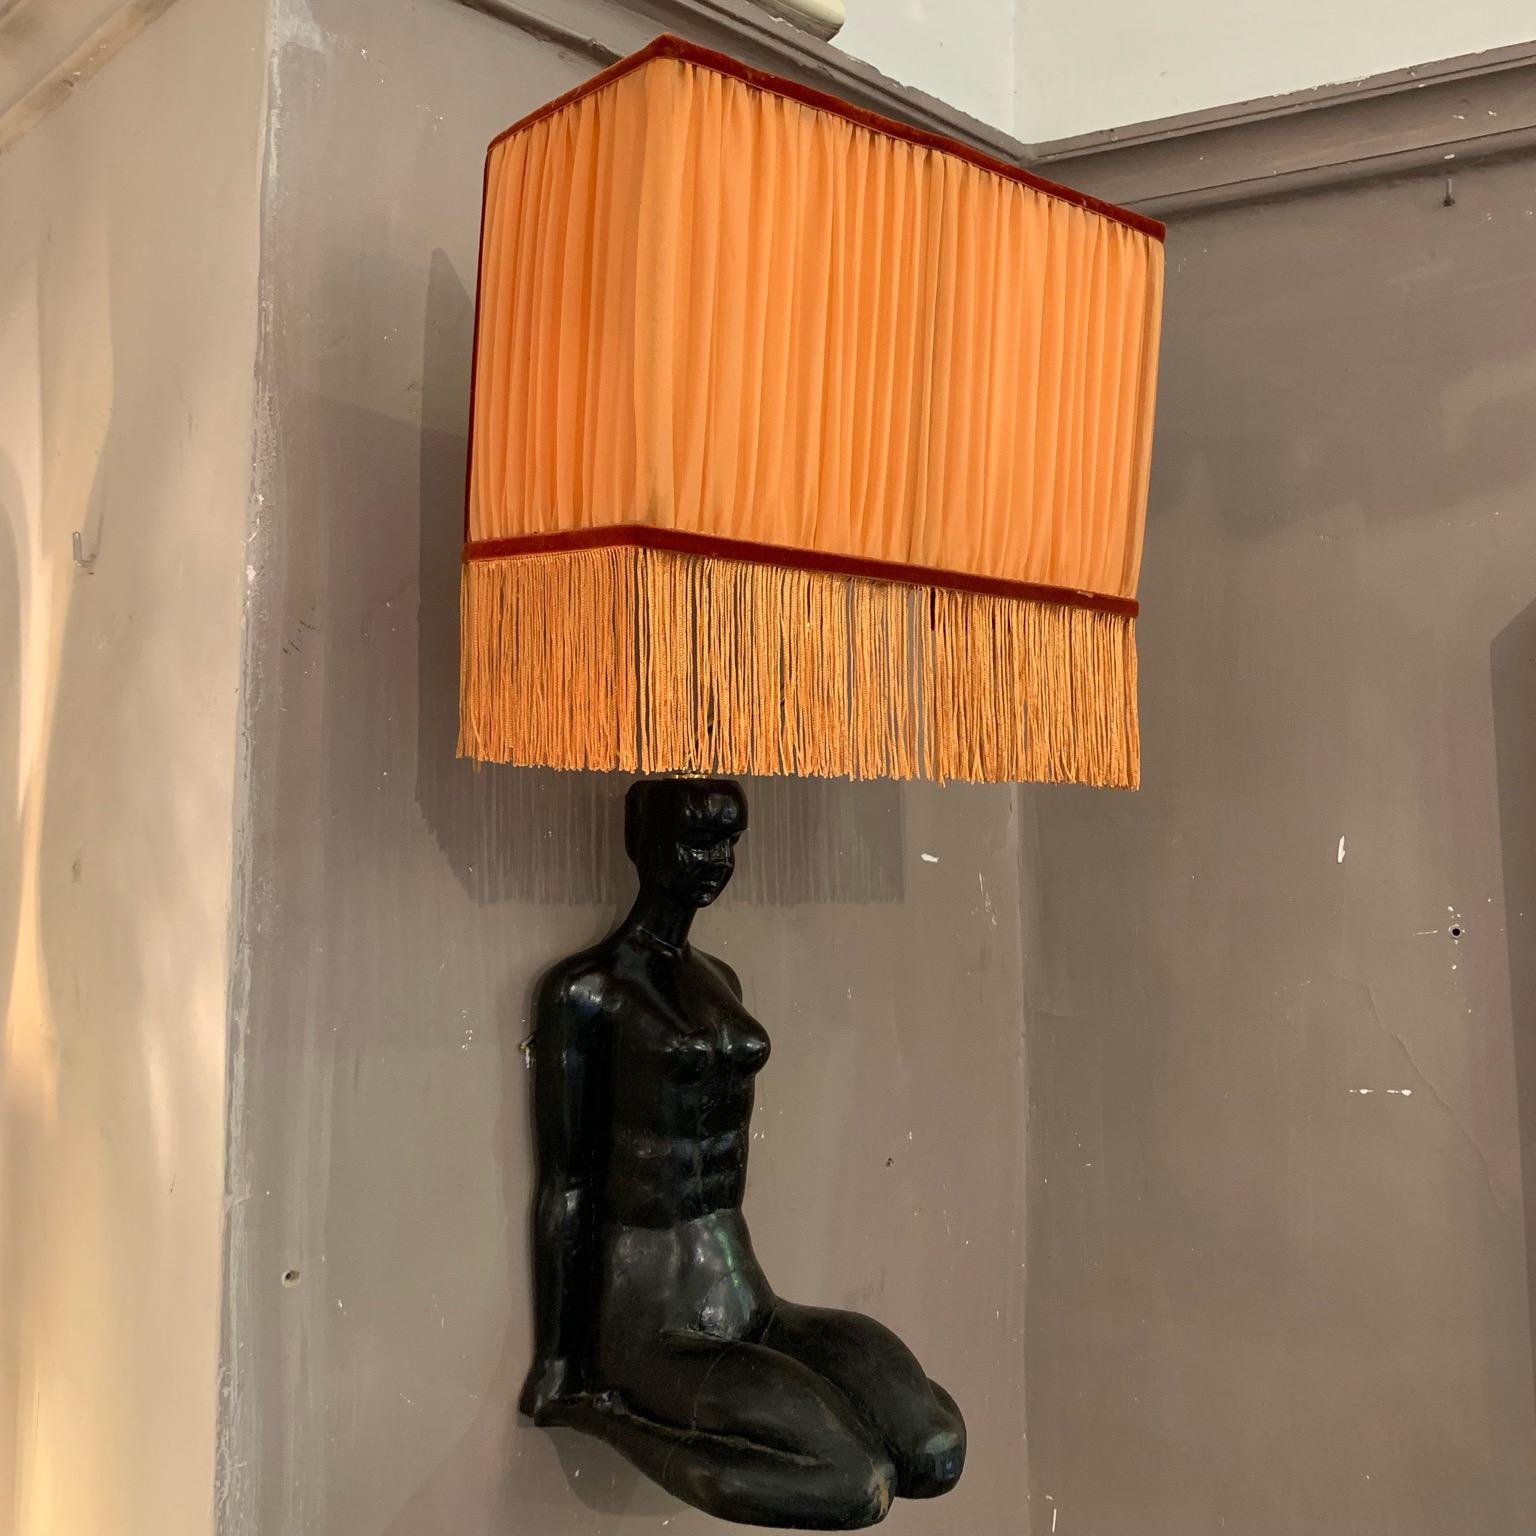 Pair of Art Deco wood sculpture woman body wall sconces in black lacquered wood with our orange silk lampshades with fringe, velvet edge.
The fringe measures cm 10 long and hangs from the bottom of the shade.